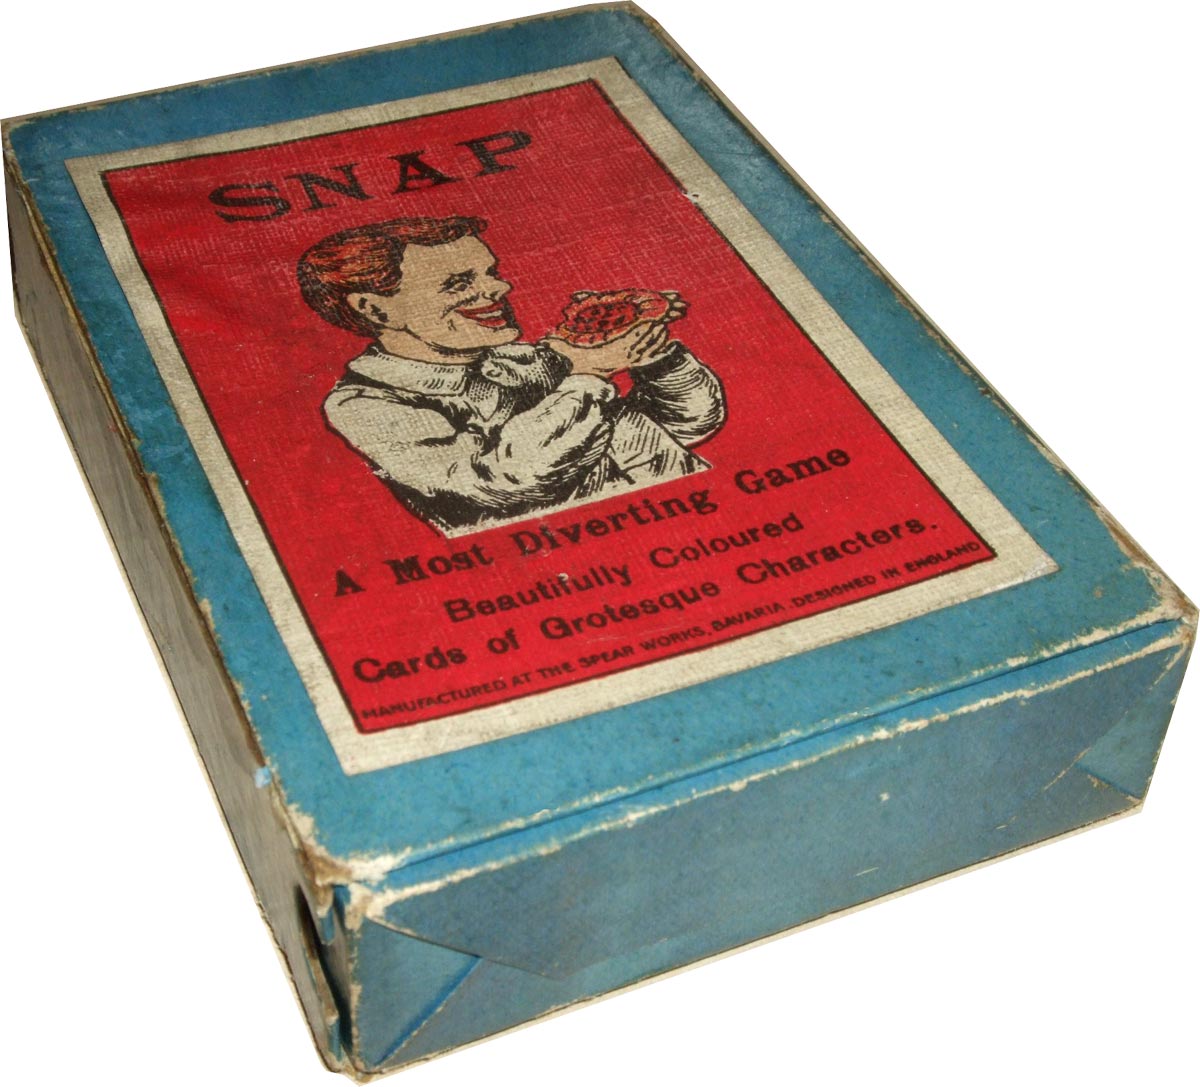 Spear's “Snap” card game from the 1920s